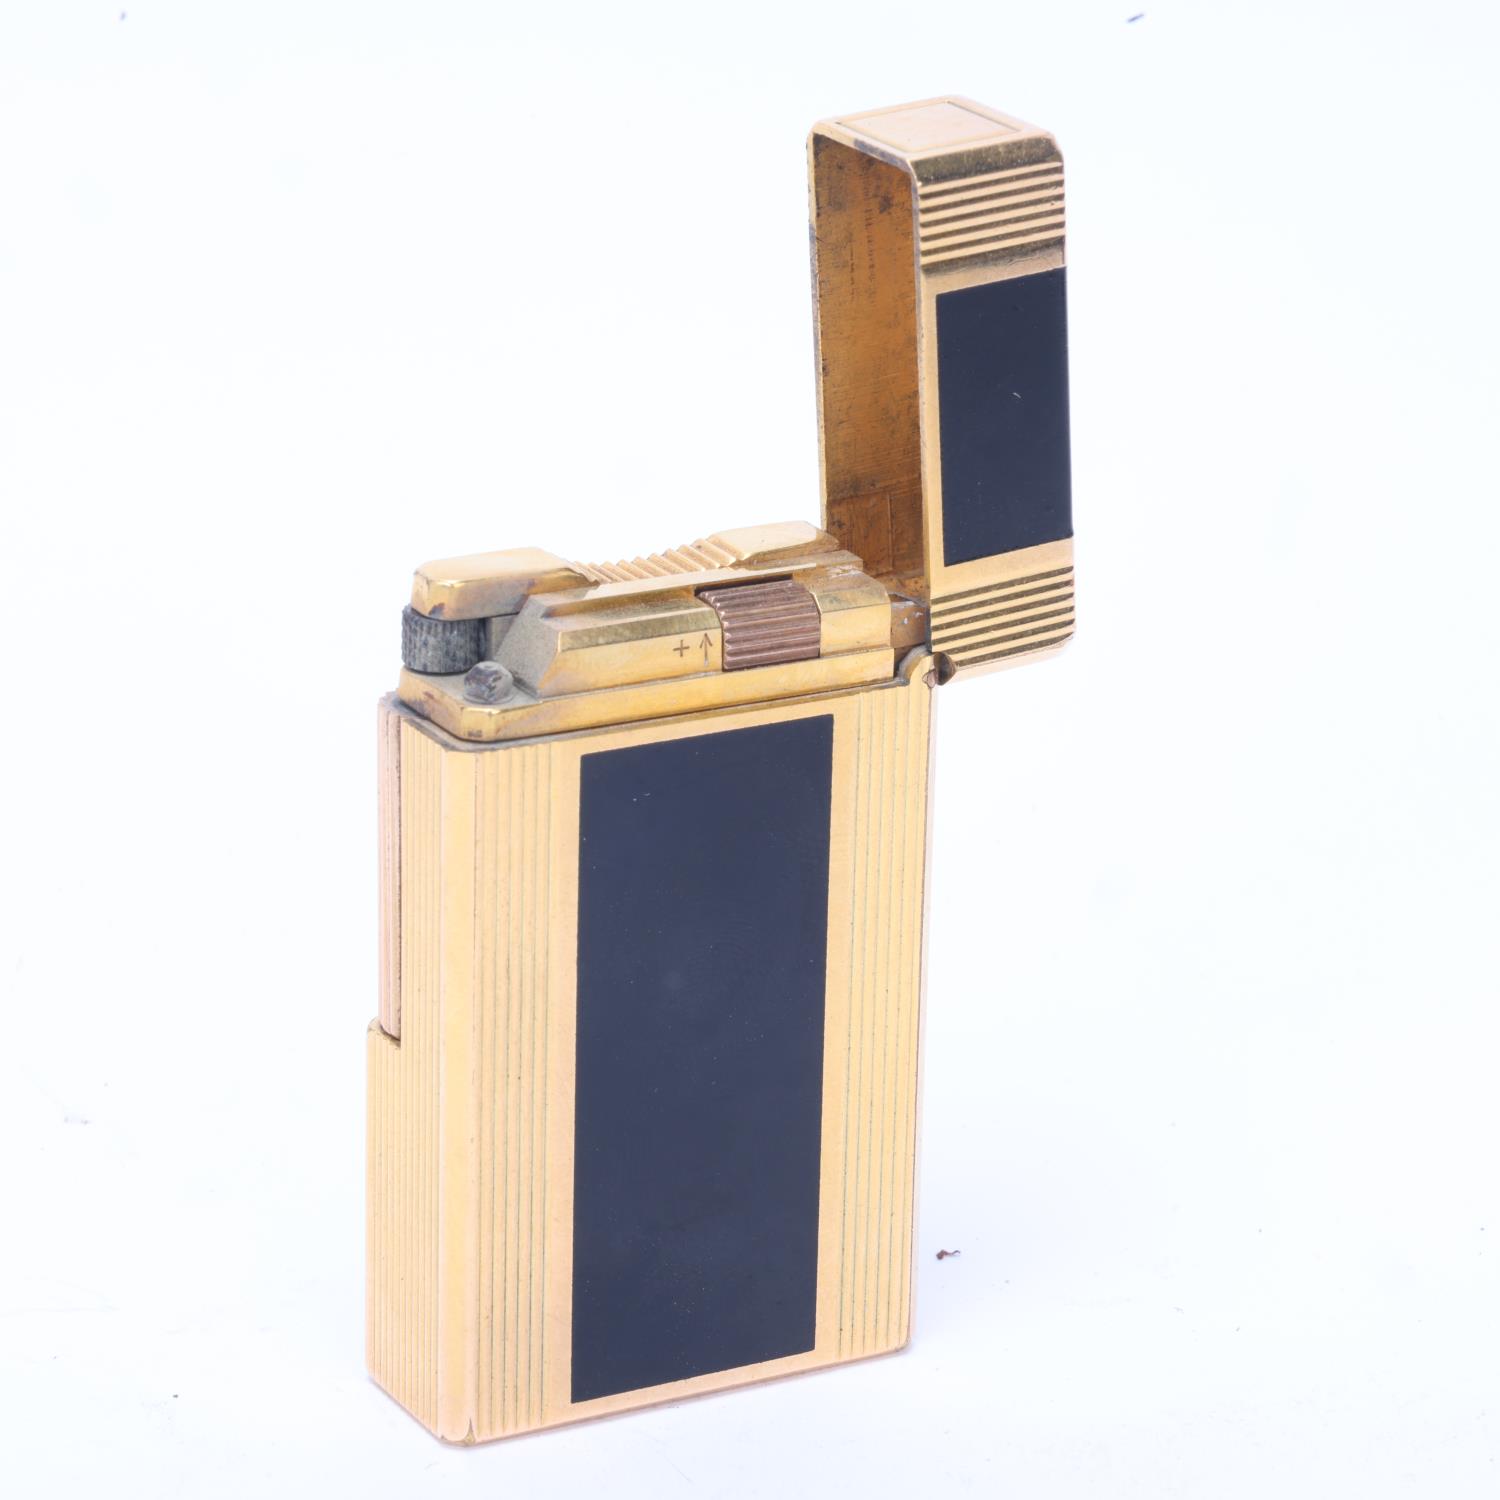 A vintage SJ Dupont lighter, gold plated and black lacquer, makers marks to base, model No Z7DG40? - Image 2 of 4